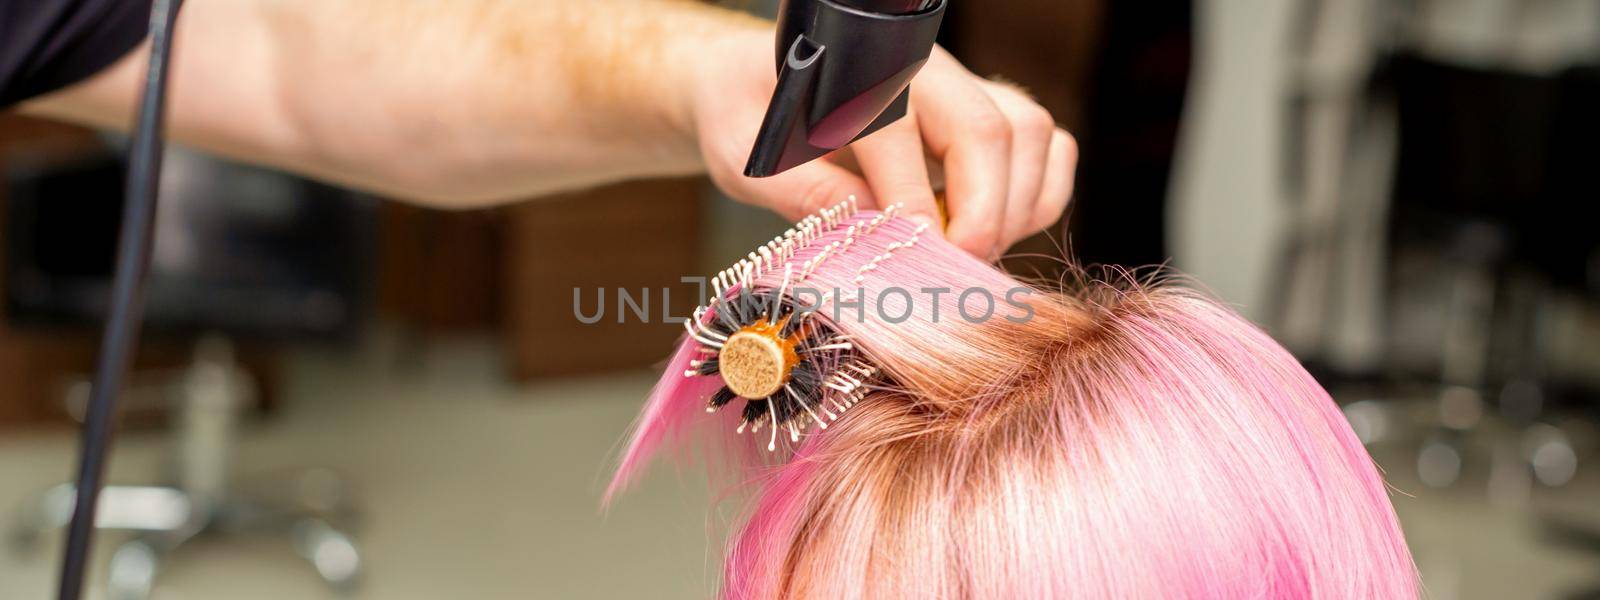 Drying short pink hair of young caucasian woman with a black hairdryer and black round brush by hands of a male hairdresser in a hair salon, close up